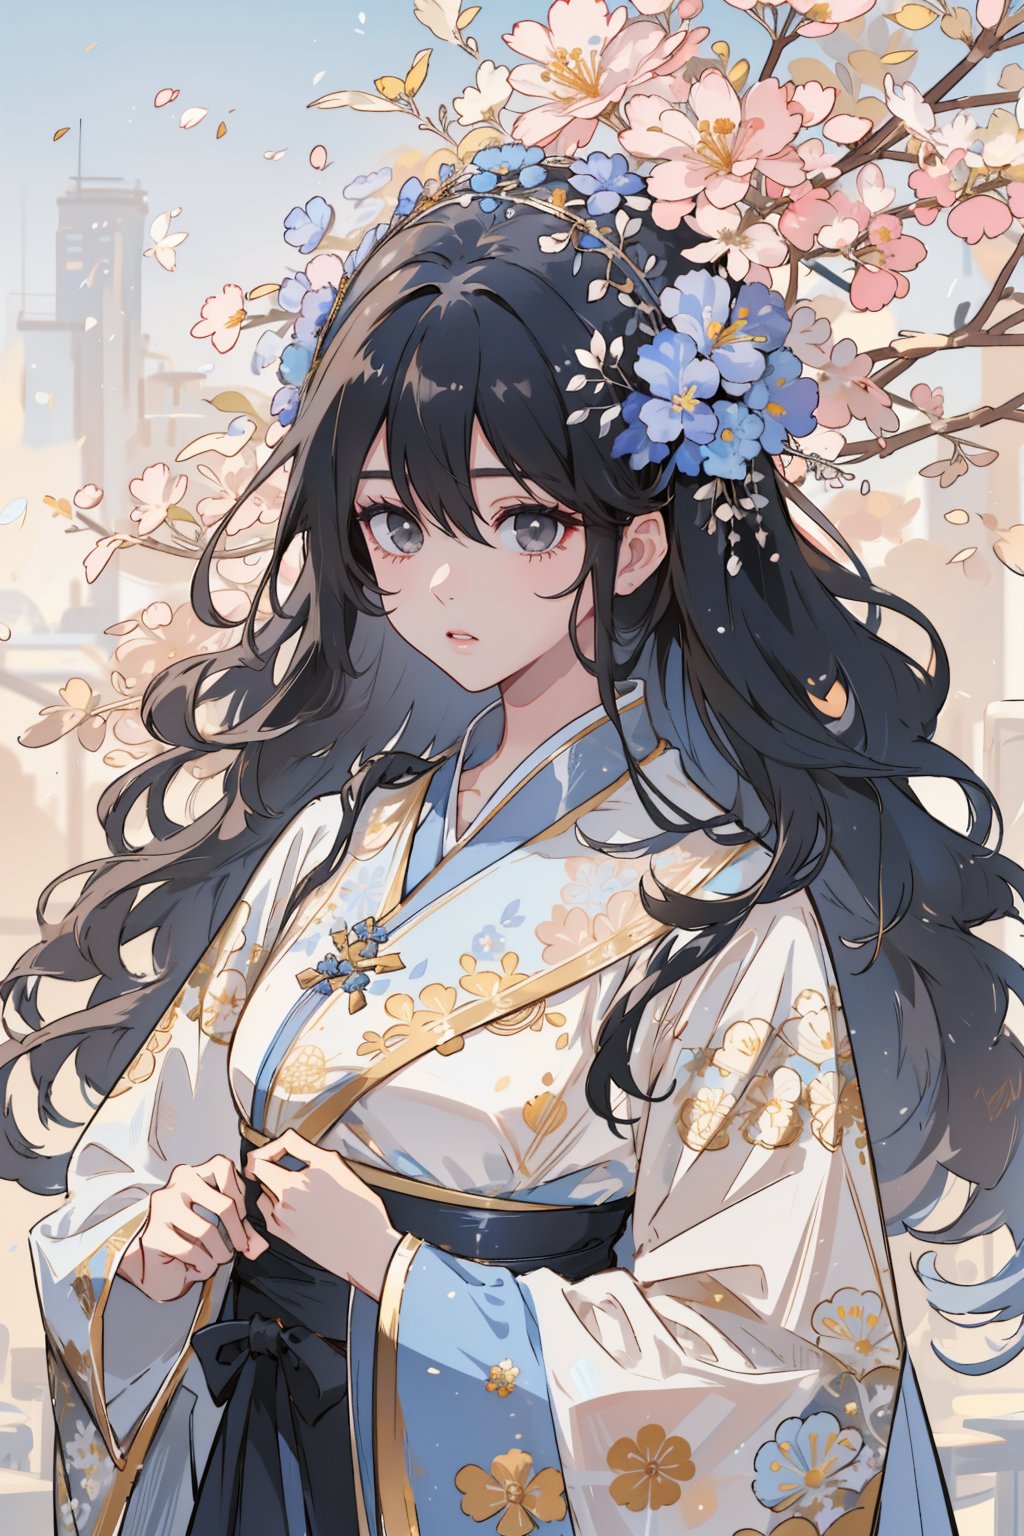 (masterpiece, best quality, highres:1.3), (Gray eyes, black hair, medium hair, wavy hair, hair between eyes, 1girl, small breasts)  hair adorned with floral decorations. She wears a traditional blue and white hanfu, and appears surrounded by large, blooming flowers and leaves that complement the floral headpiece. The background is a deep, muted blue, which enhances the warm tones of the flowers and her attire. Her expression is serene and her eyes are large and expressive, adding to the gentle and elegant feel of the artwork.